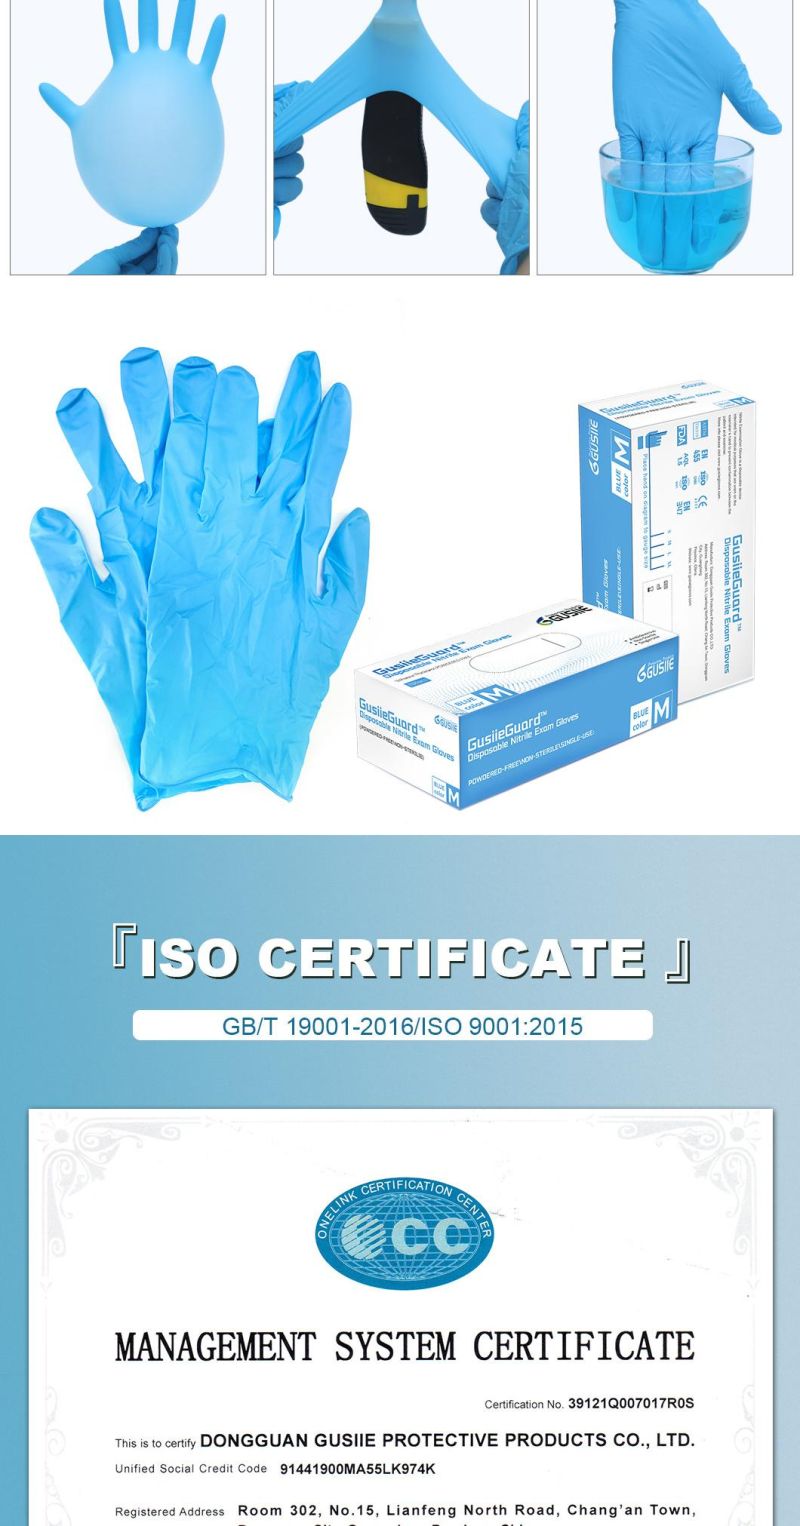 Gusiie High Quality Made in China Food Grade Disposable Nitrile Examination Gloves